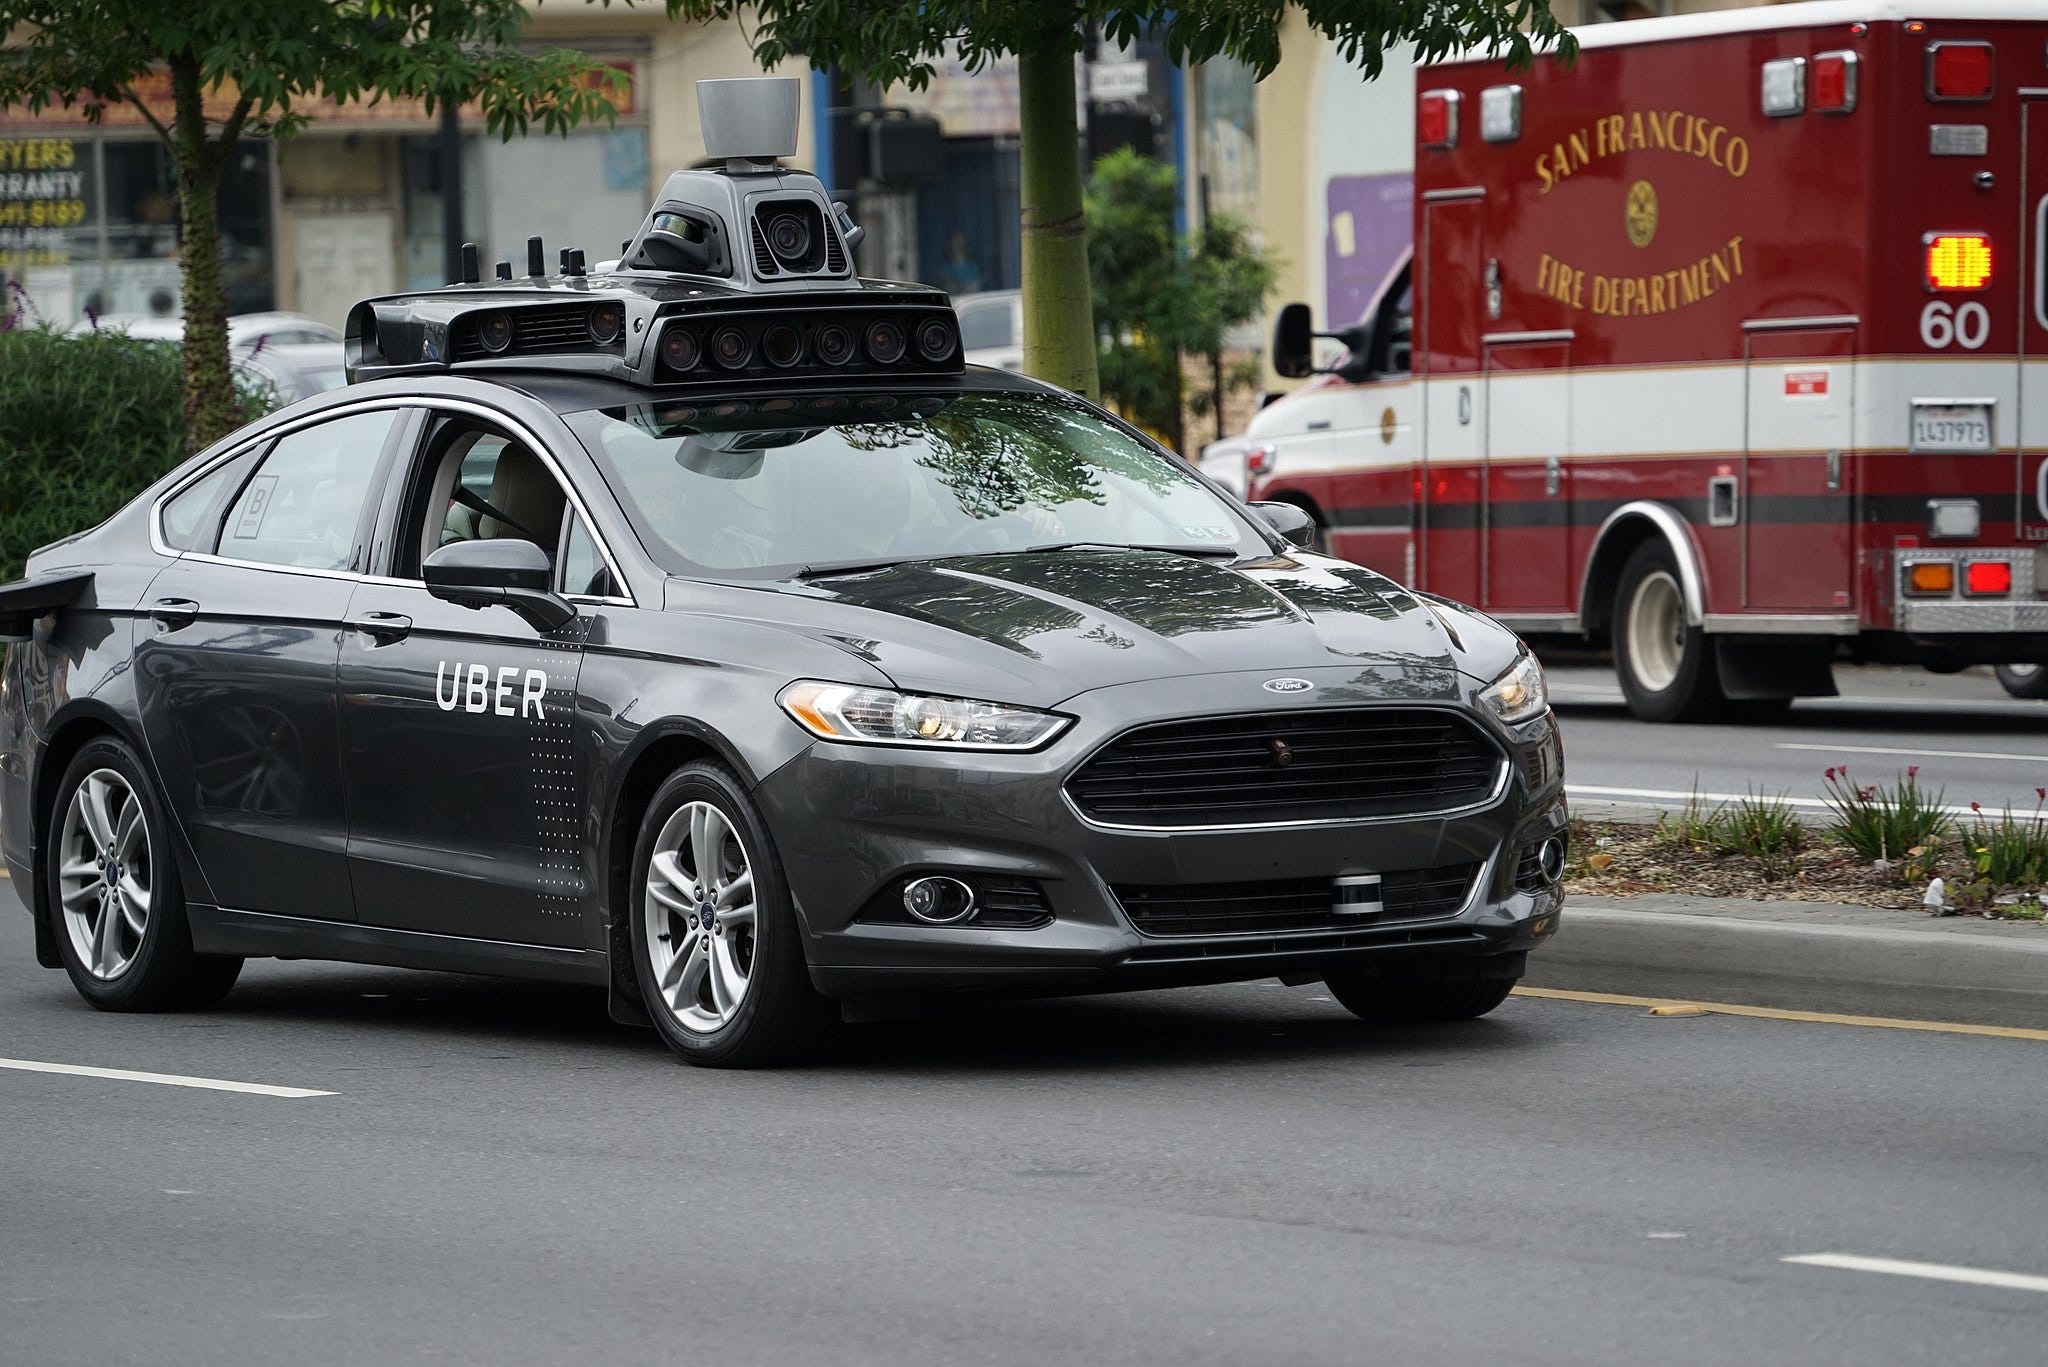 Uber And Motional Tap Las Vegas For Their Collaborative Robotaxi Debut